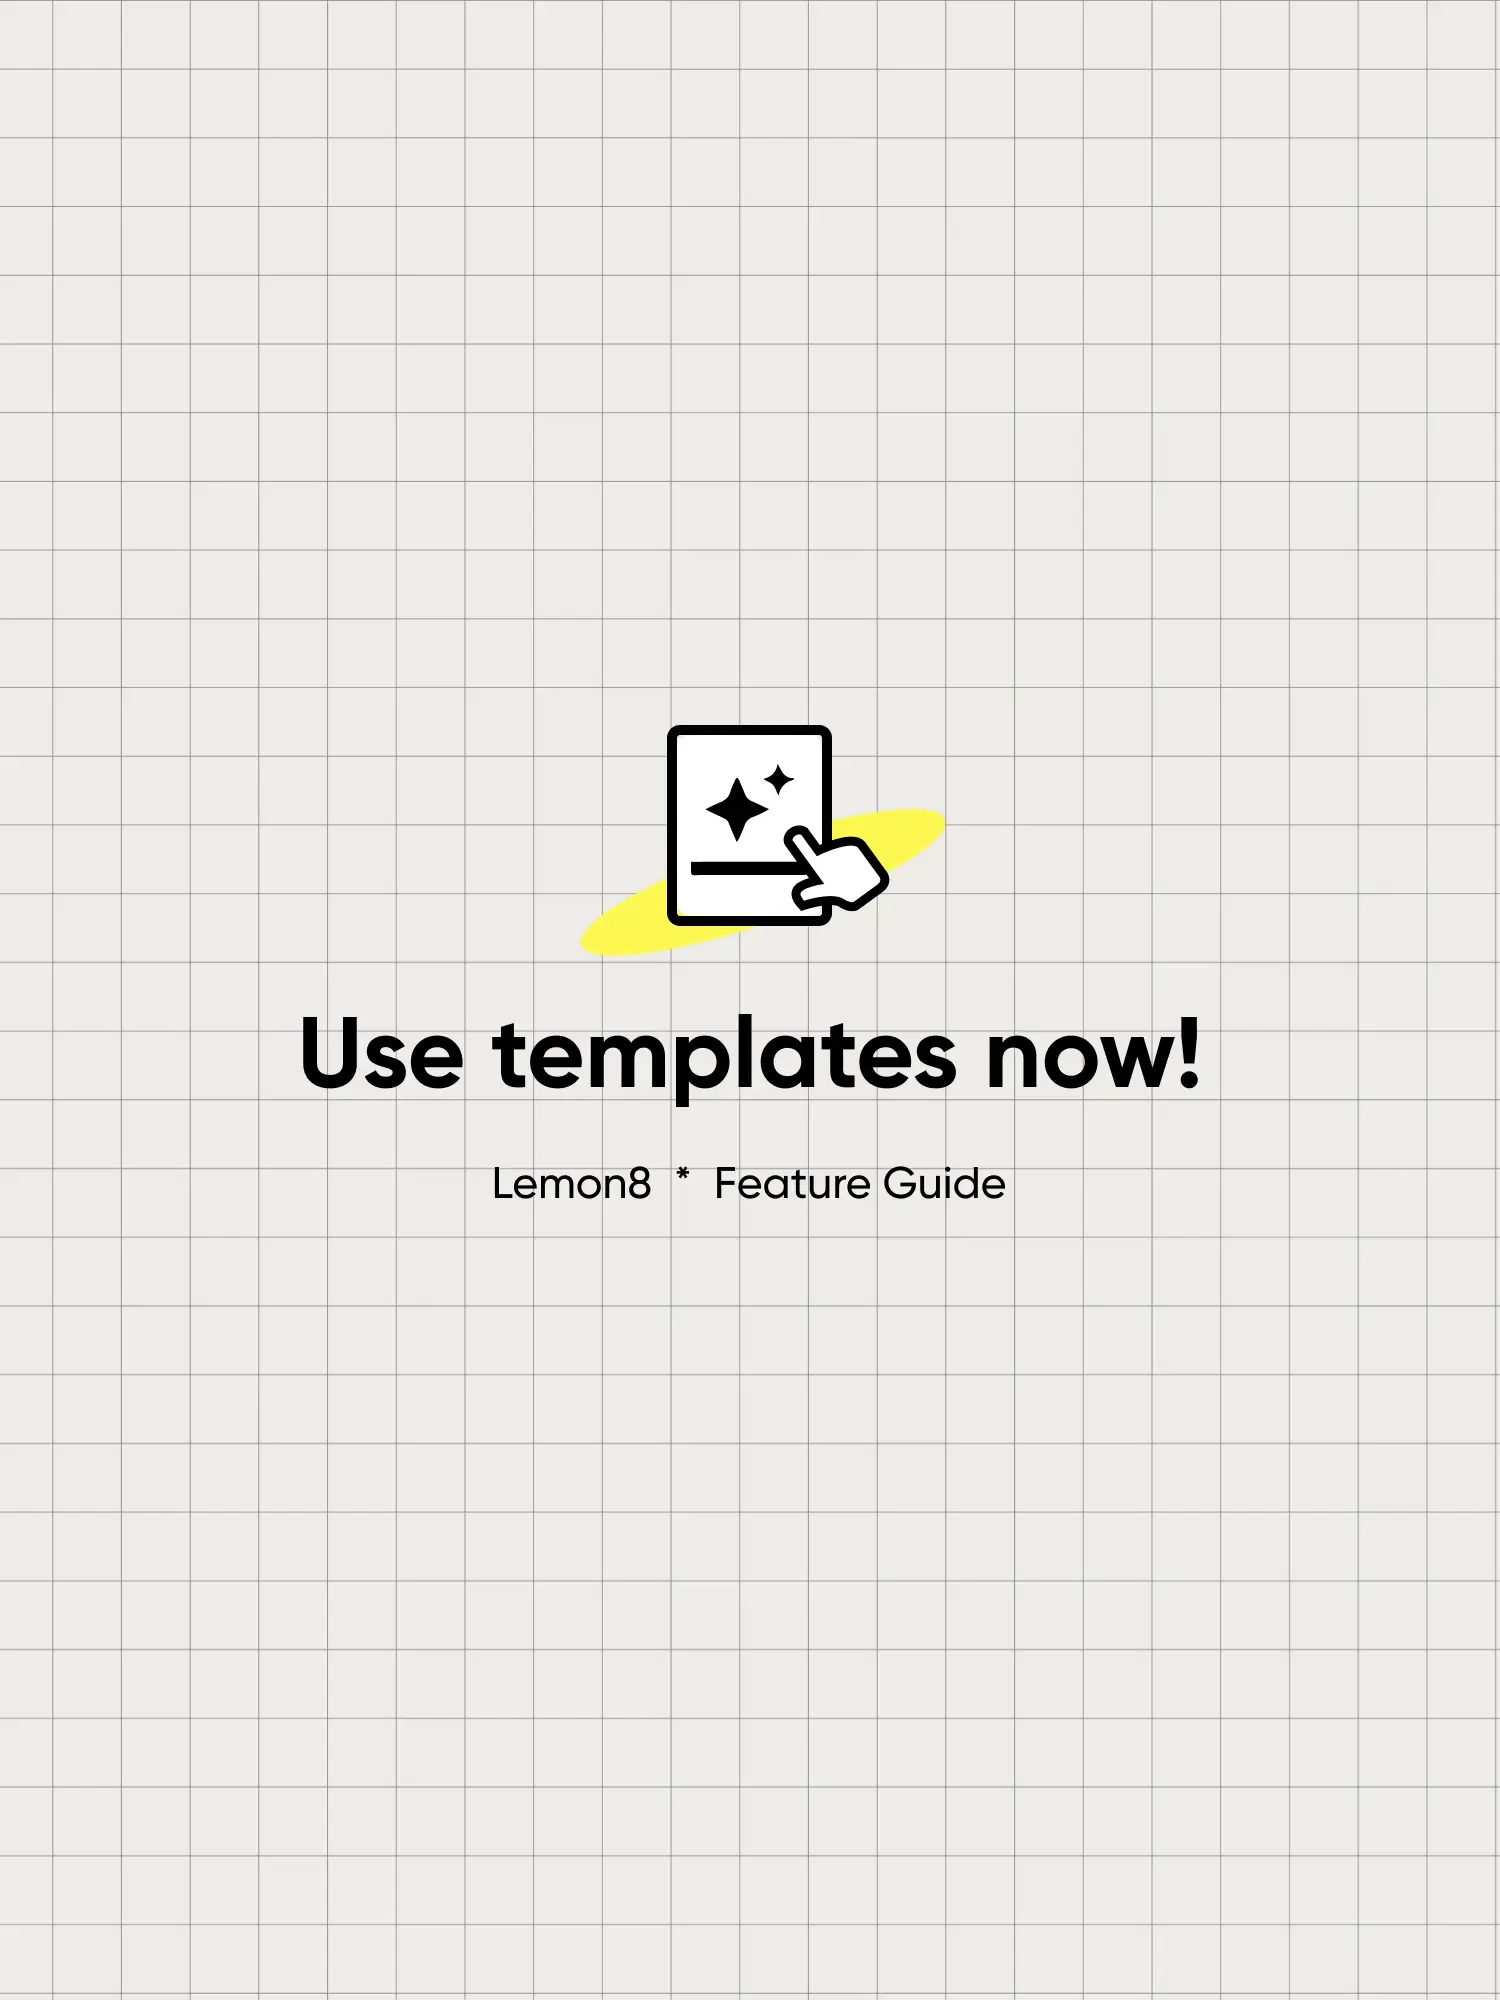  A template is being used to create a page with a blue background and a button that says "Use templates now!".